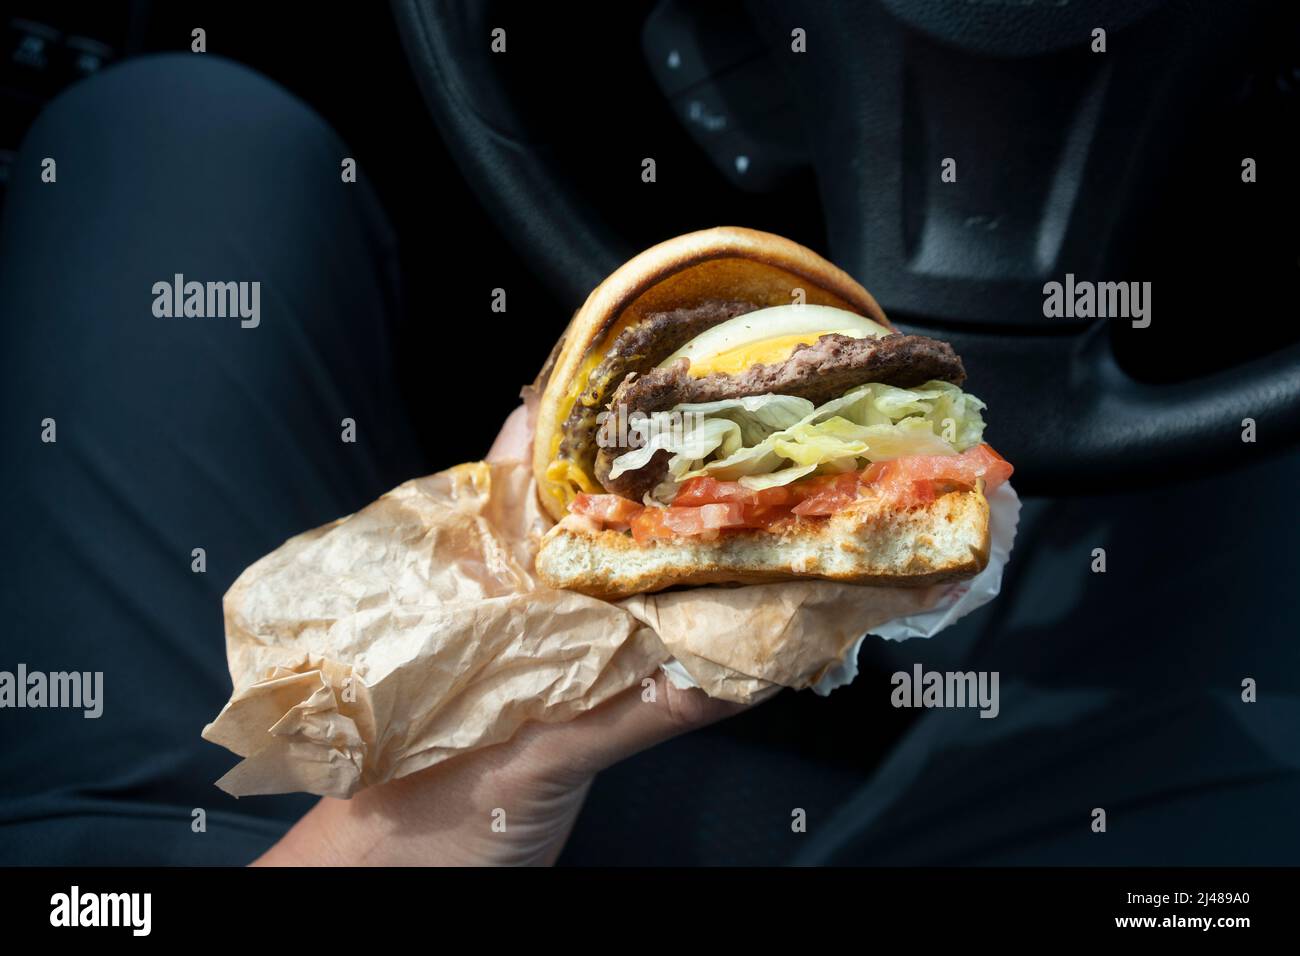 A person eats a double patty cheeseburger ordered from a drive-through burger chain restaurant in his car. Dangerous forever chemicals, known as PFAS... Stock Photo